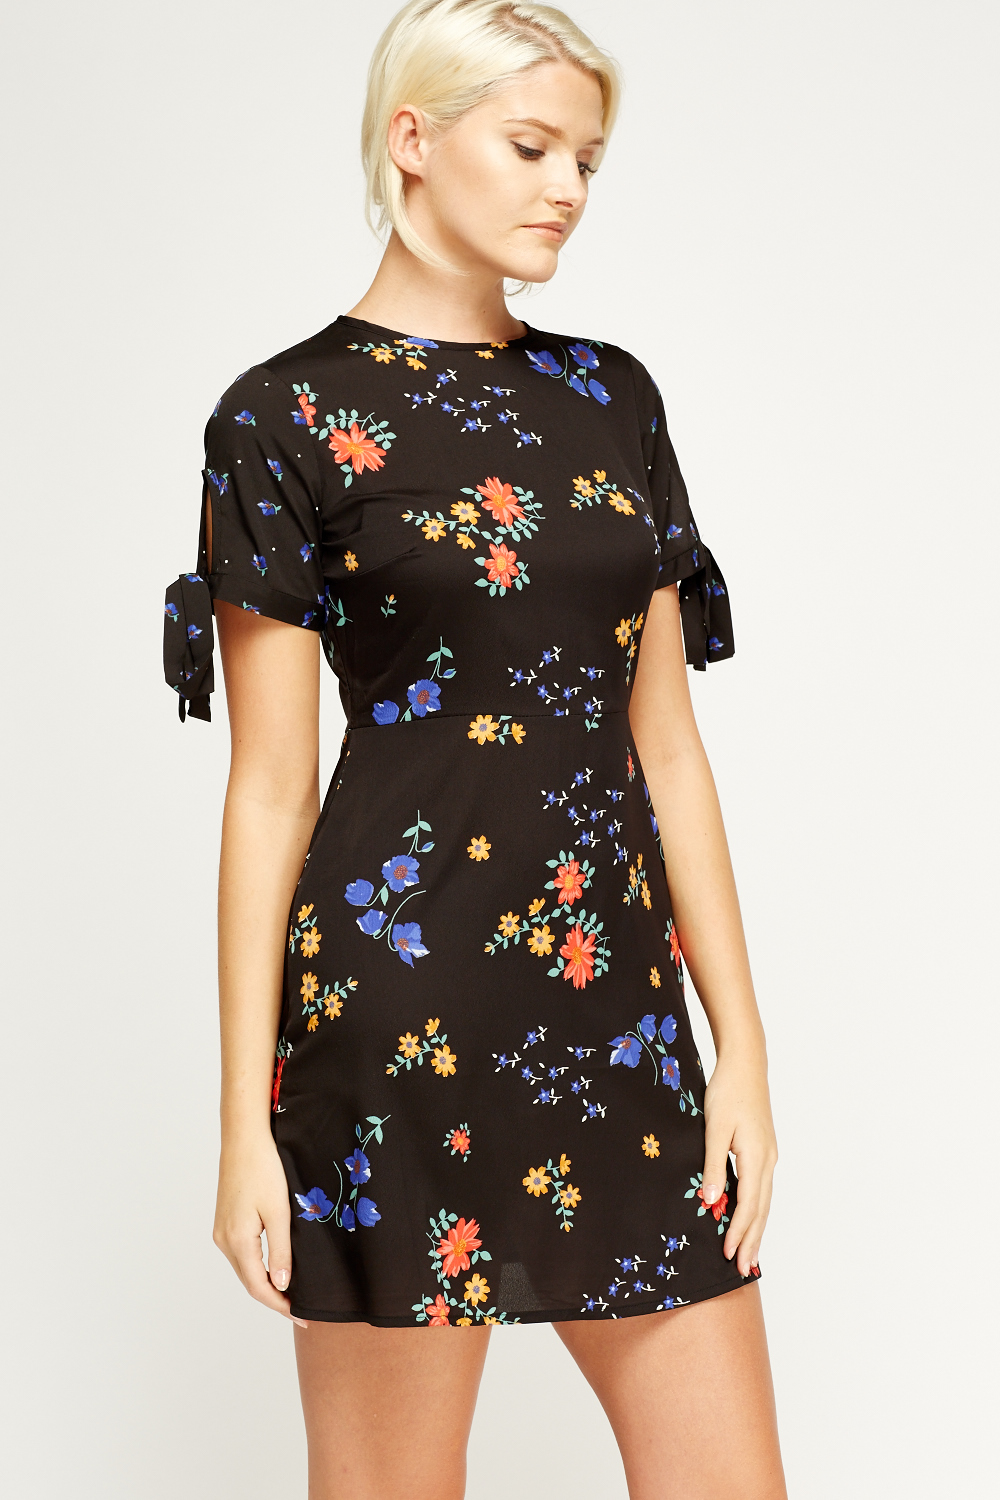 Floral Tie Sleeve Shift Dress - Just $7